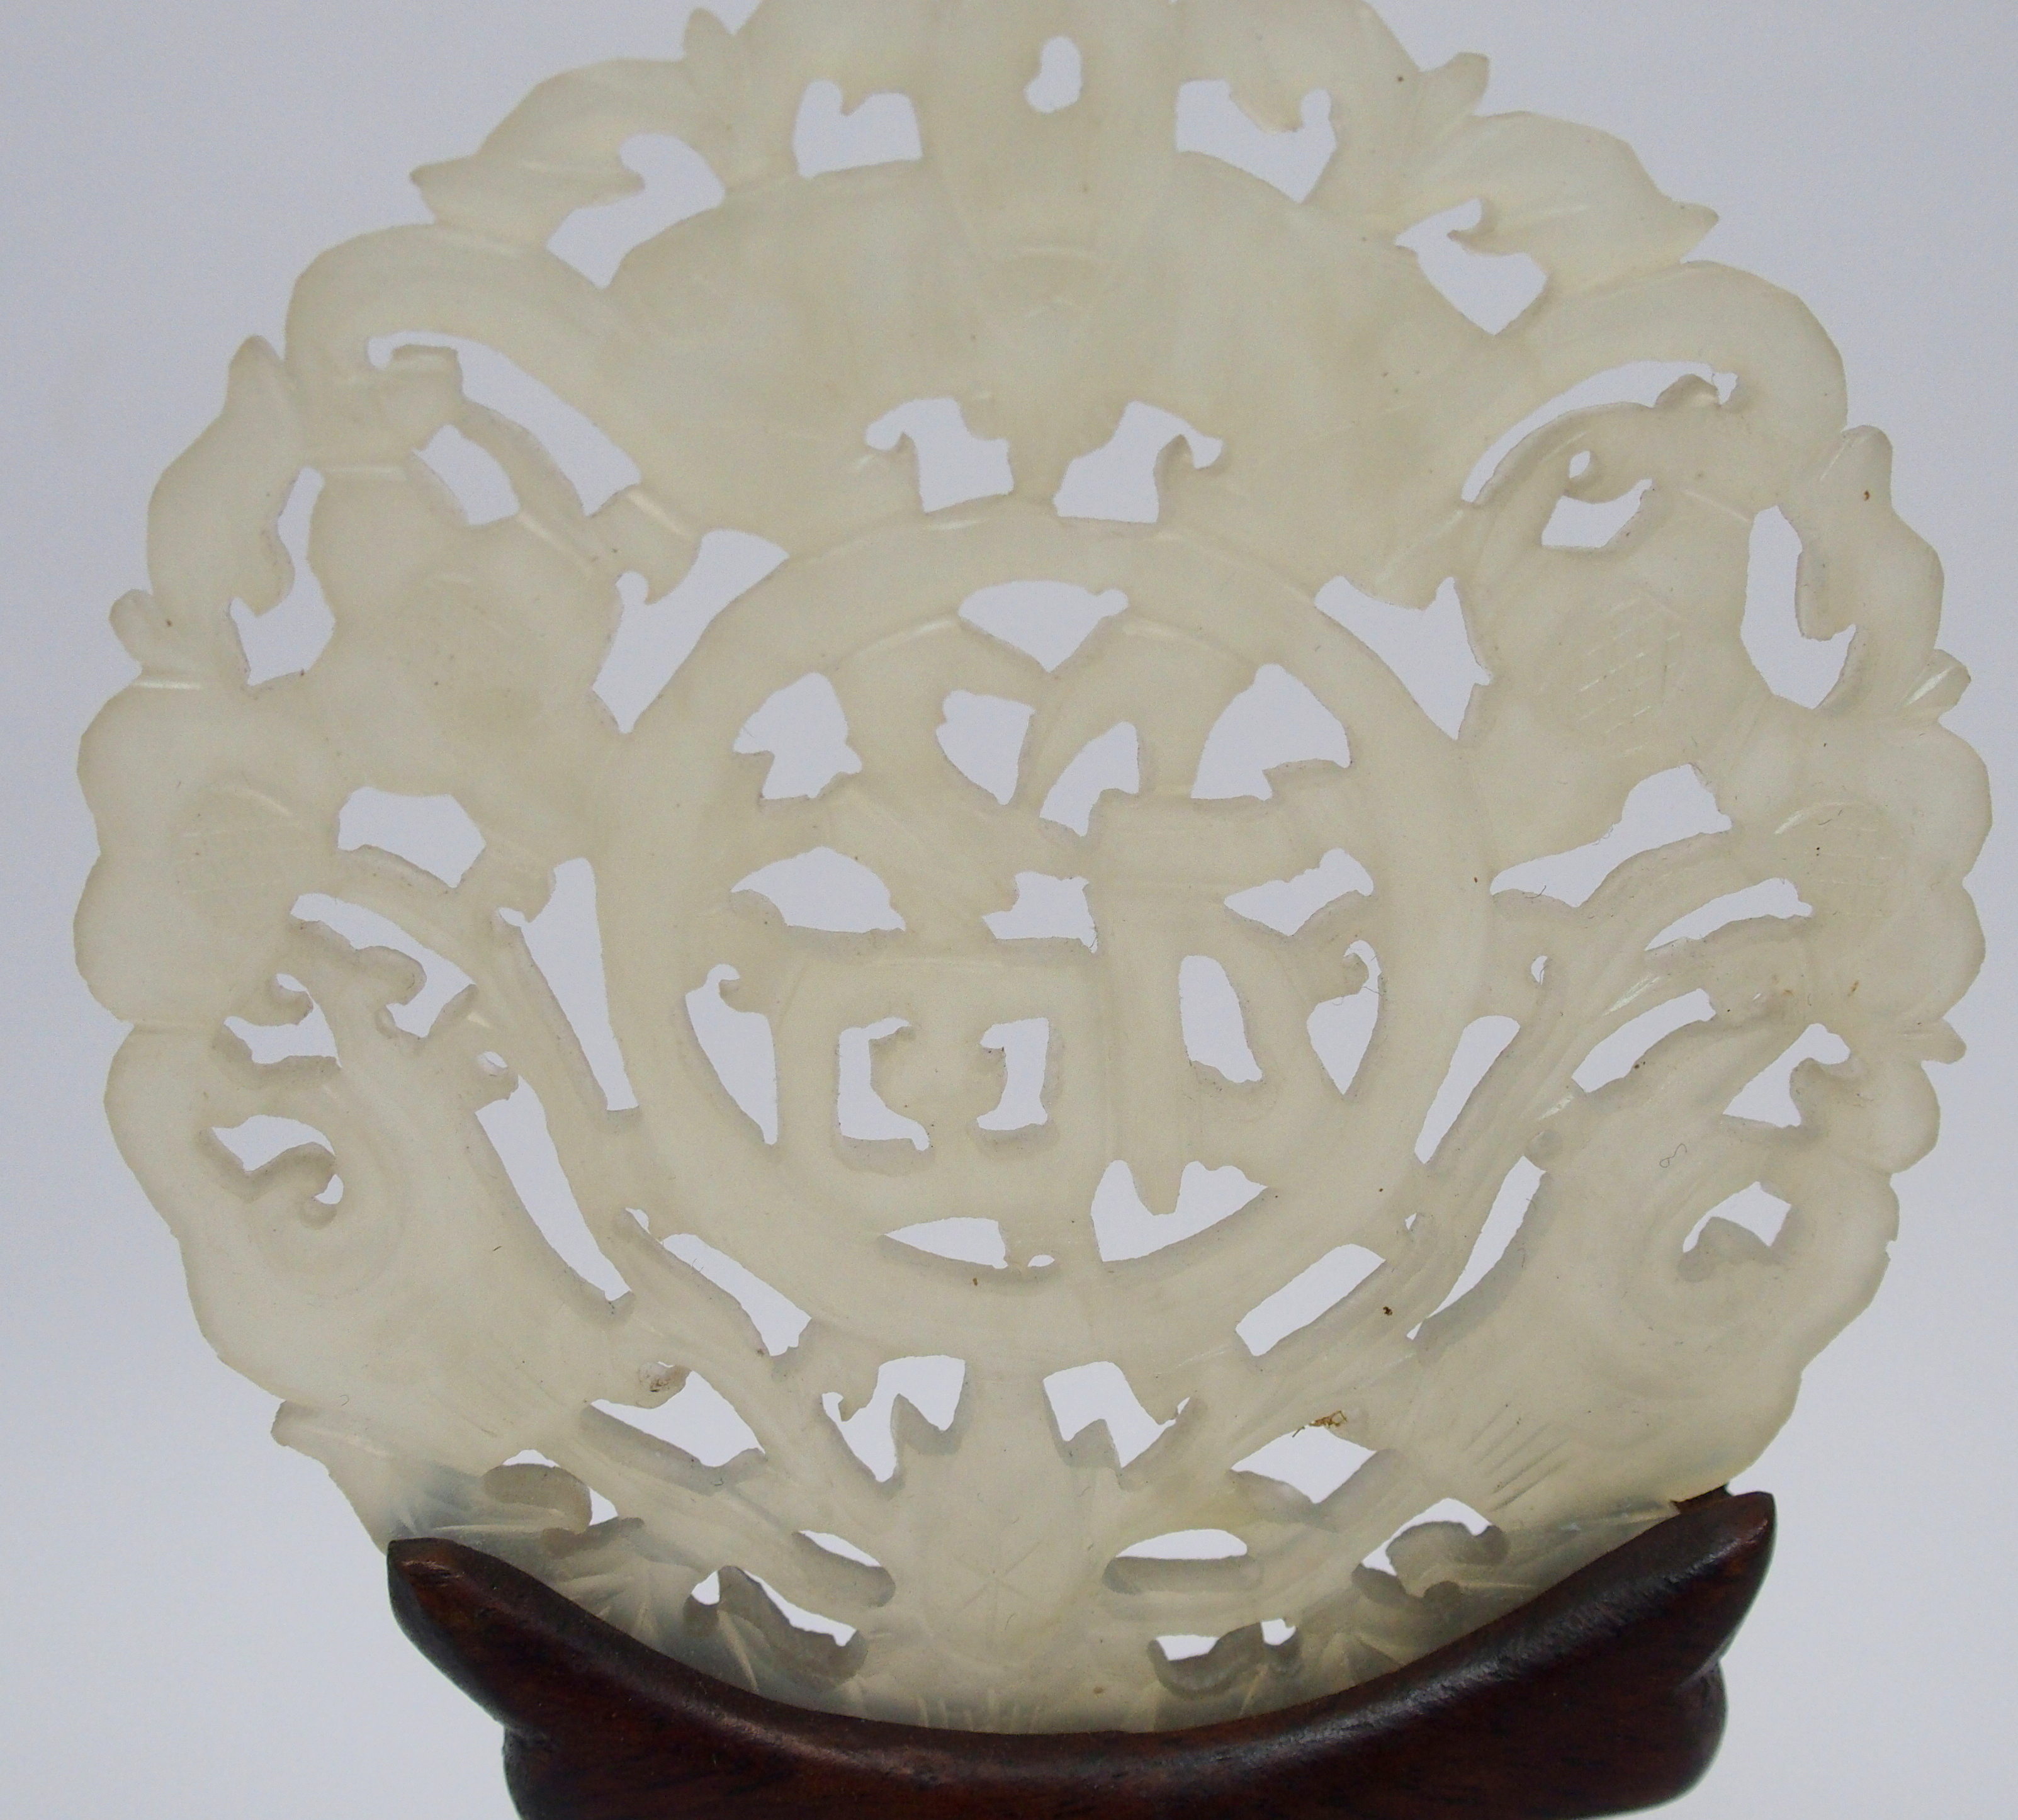 A Chinese hardstone medallion carved with bats surrounding characters, 7cm diameter, wood stand - Image 9 of 10